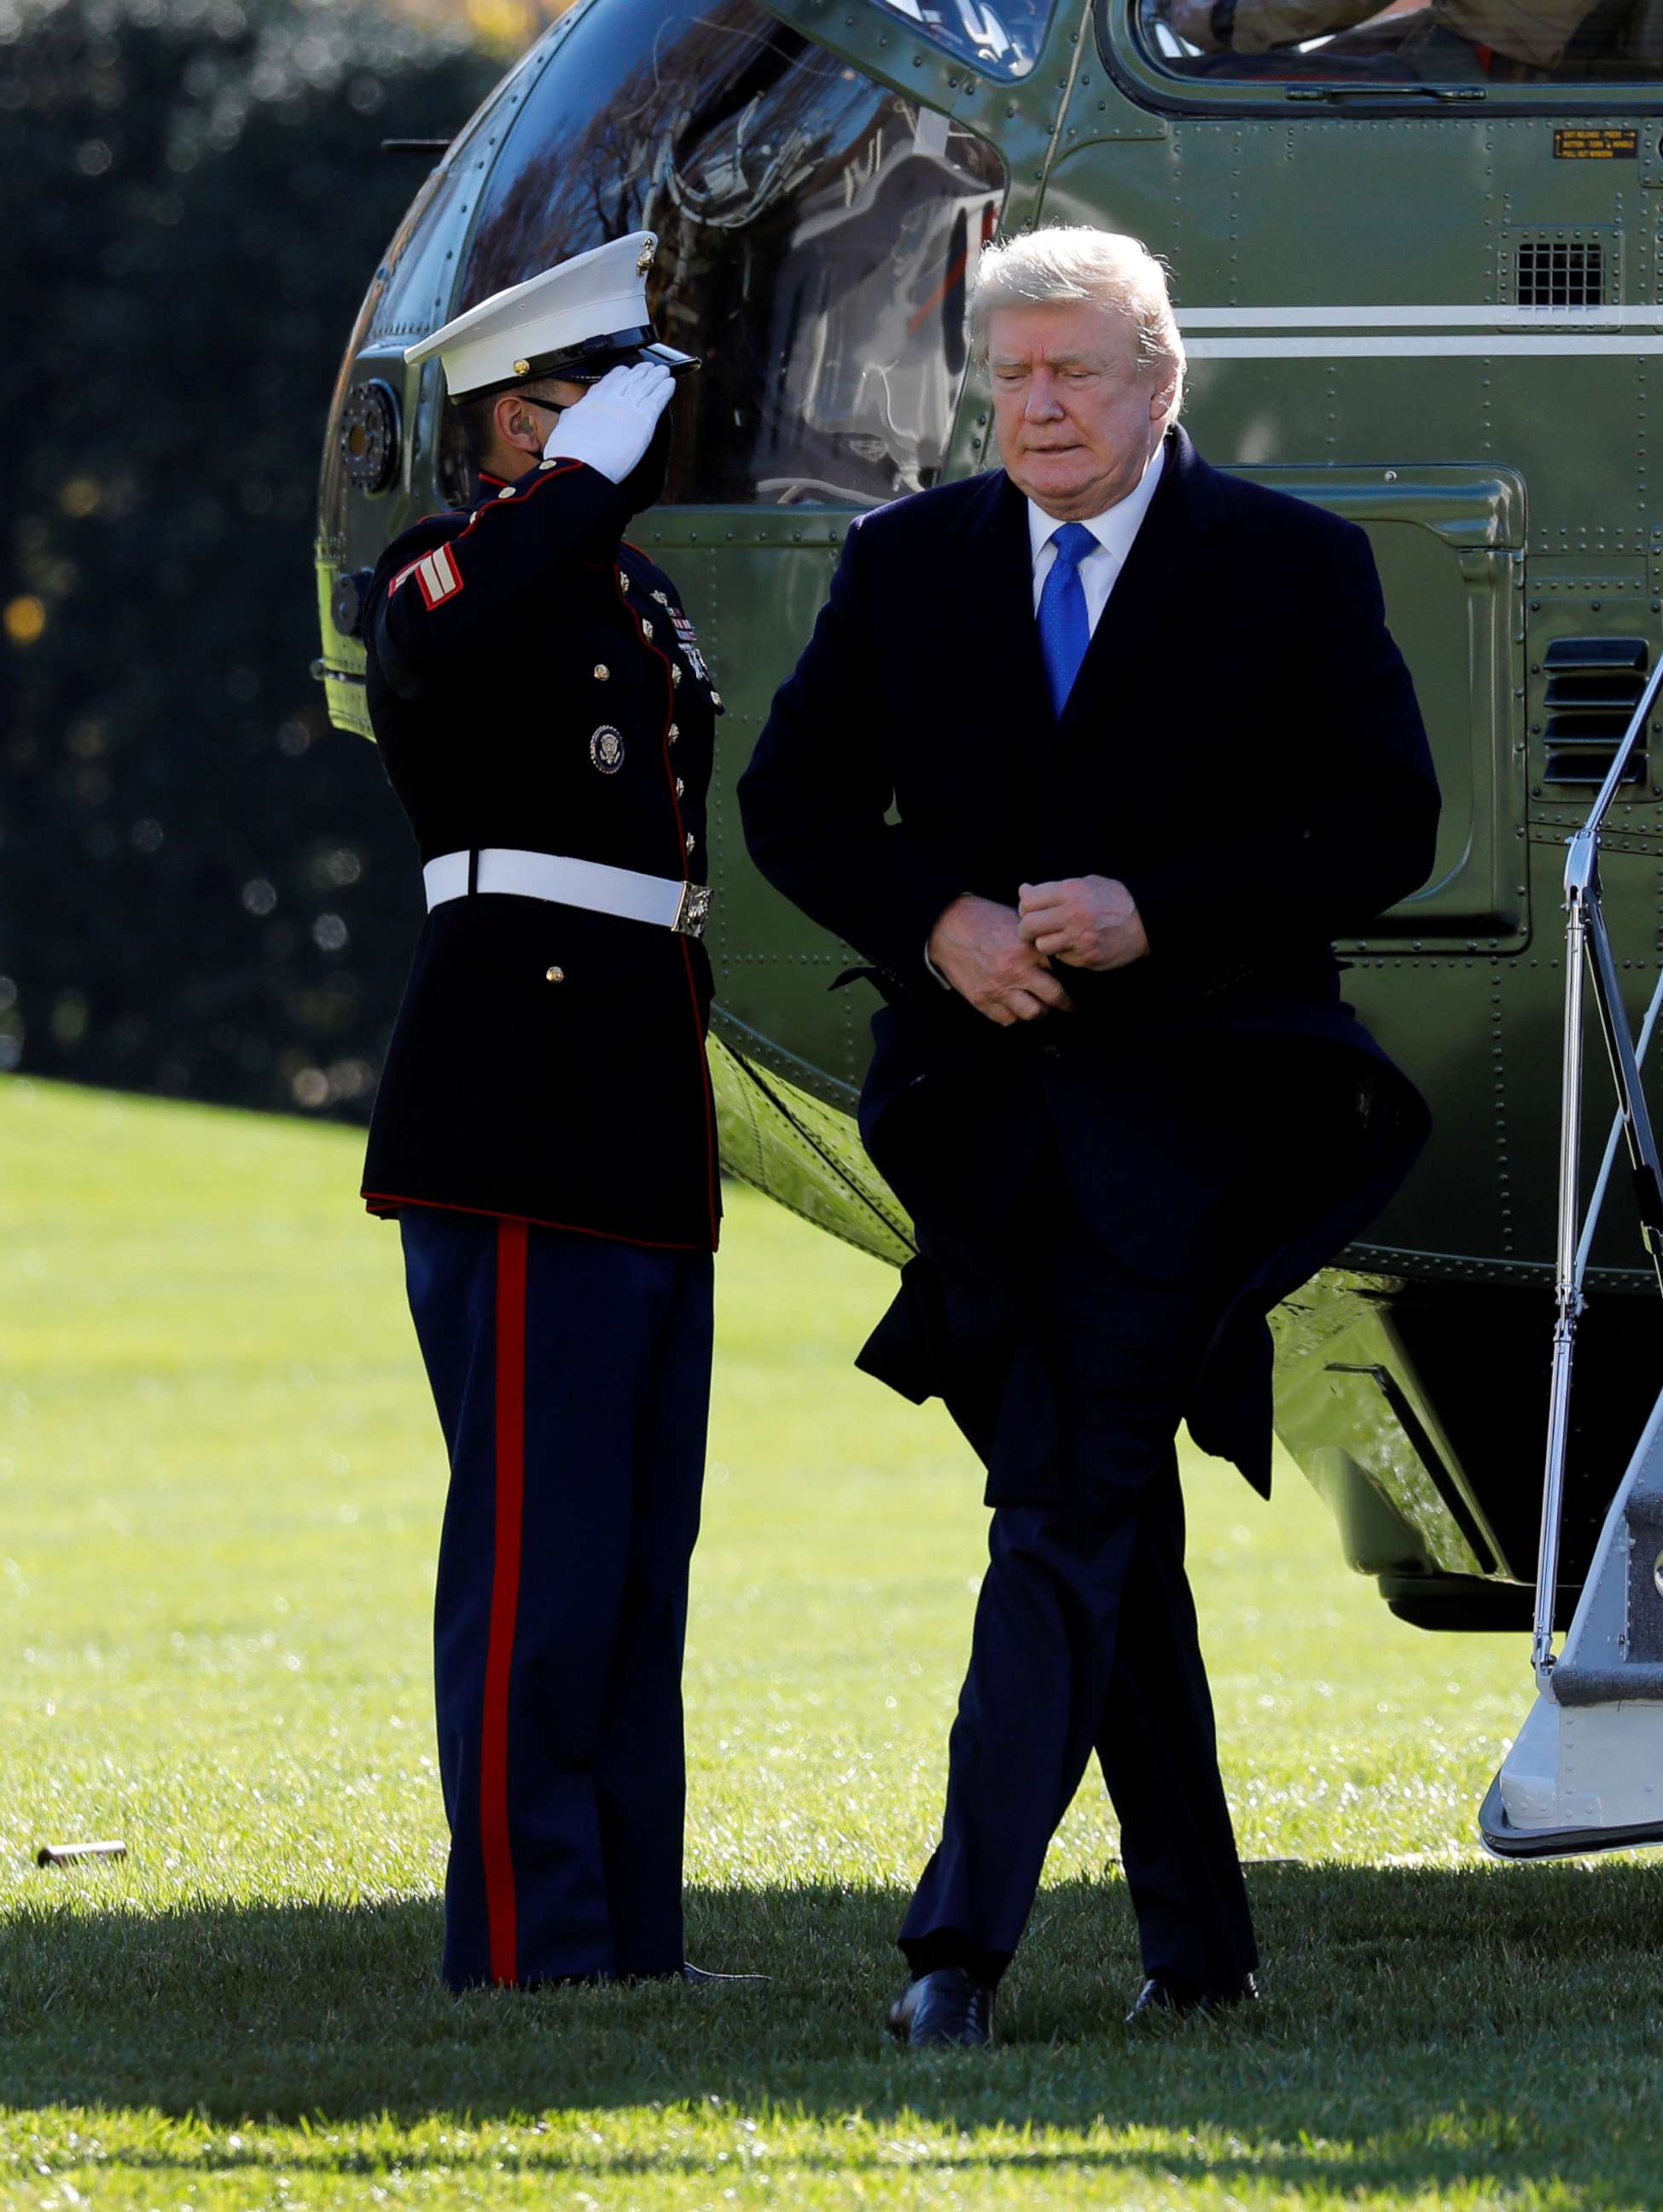 PHOTO: President Donald Trump steps out of the Marine One helicopter on the South Lawn of the White House upon his return to Washington from Camp David, Nov. 29, 2020.